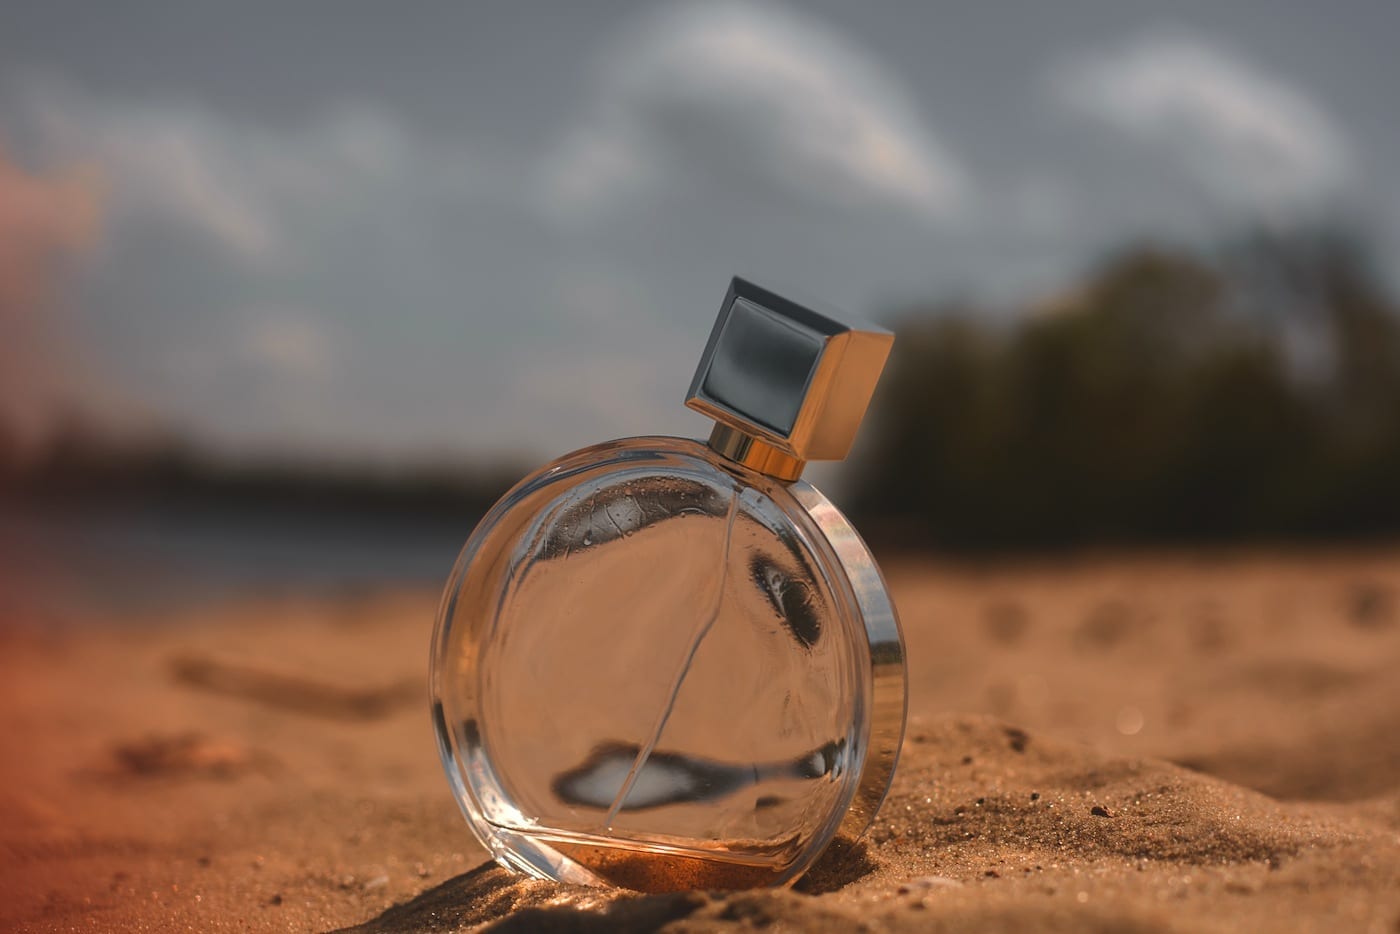 Best Chanel perfume for summer - 7 fragrances for warm weather